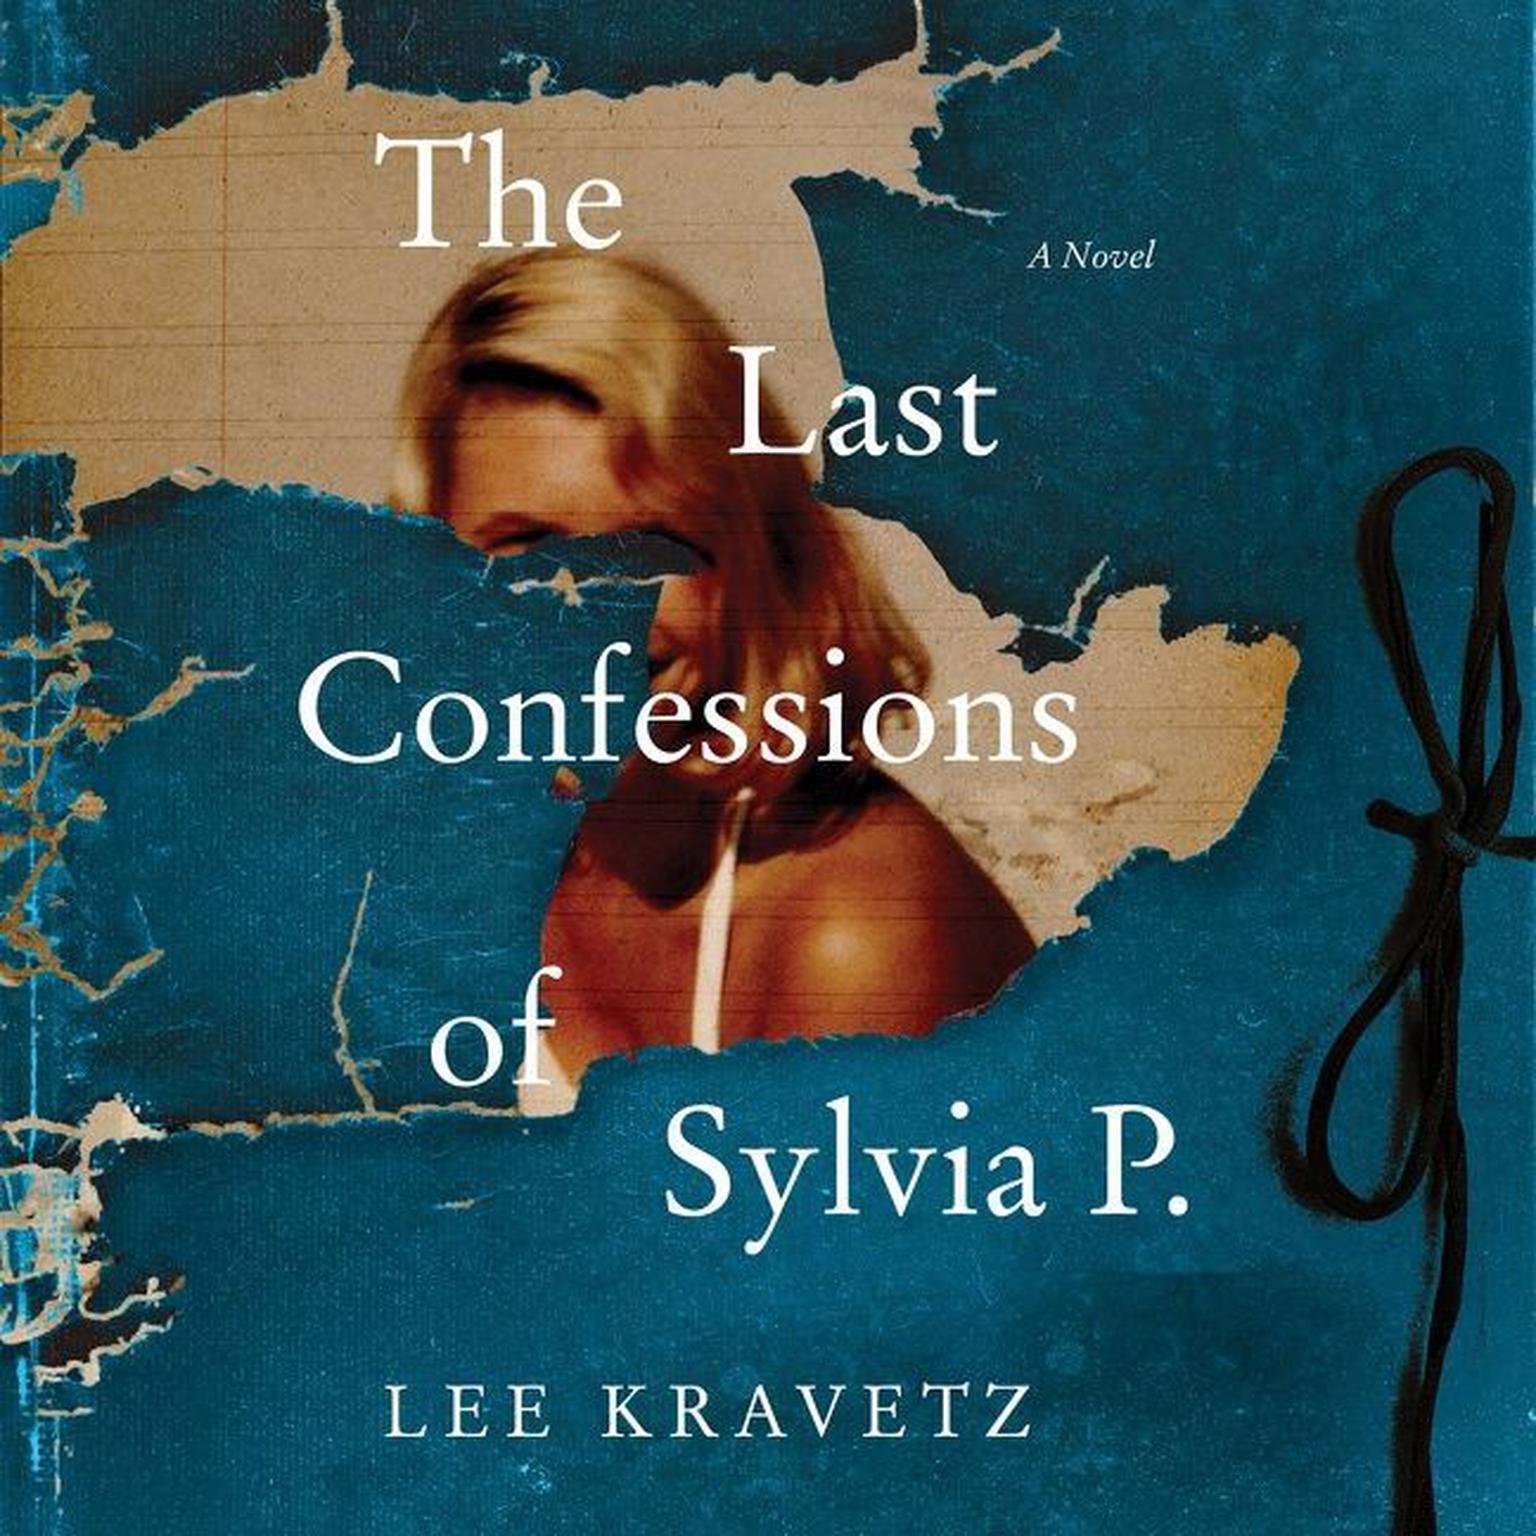 The Last Confessions of Sylvia P.: A Novel Audiobook, by Lee Kravetz